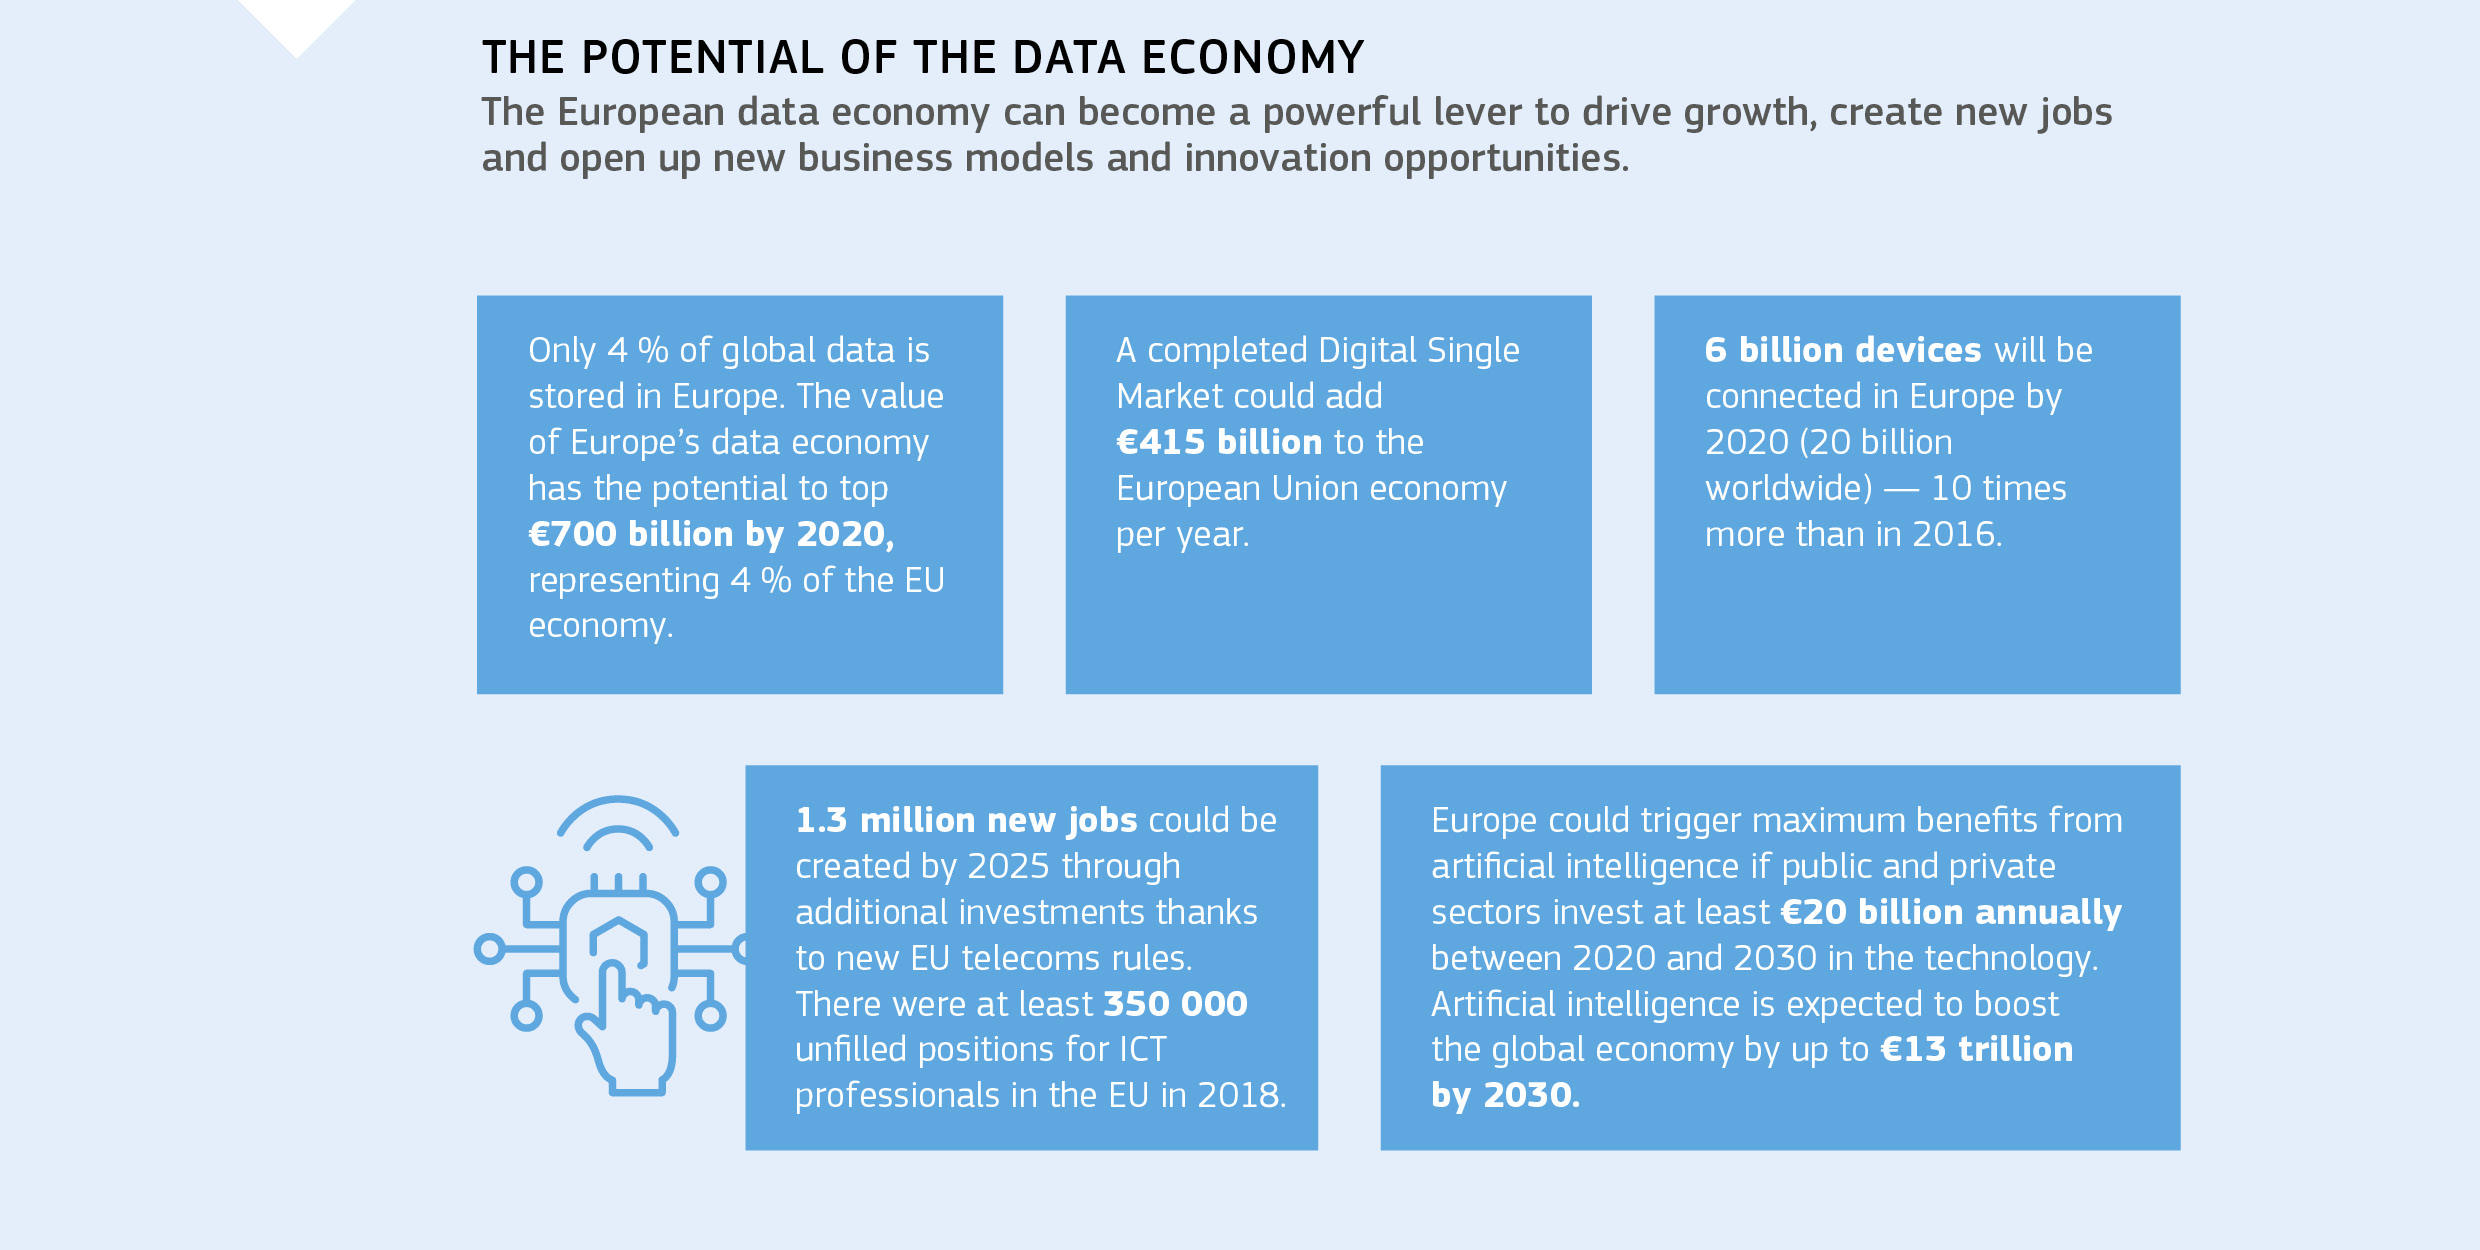 THE POTENTIAL OF THE DATA ECONOMY